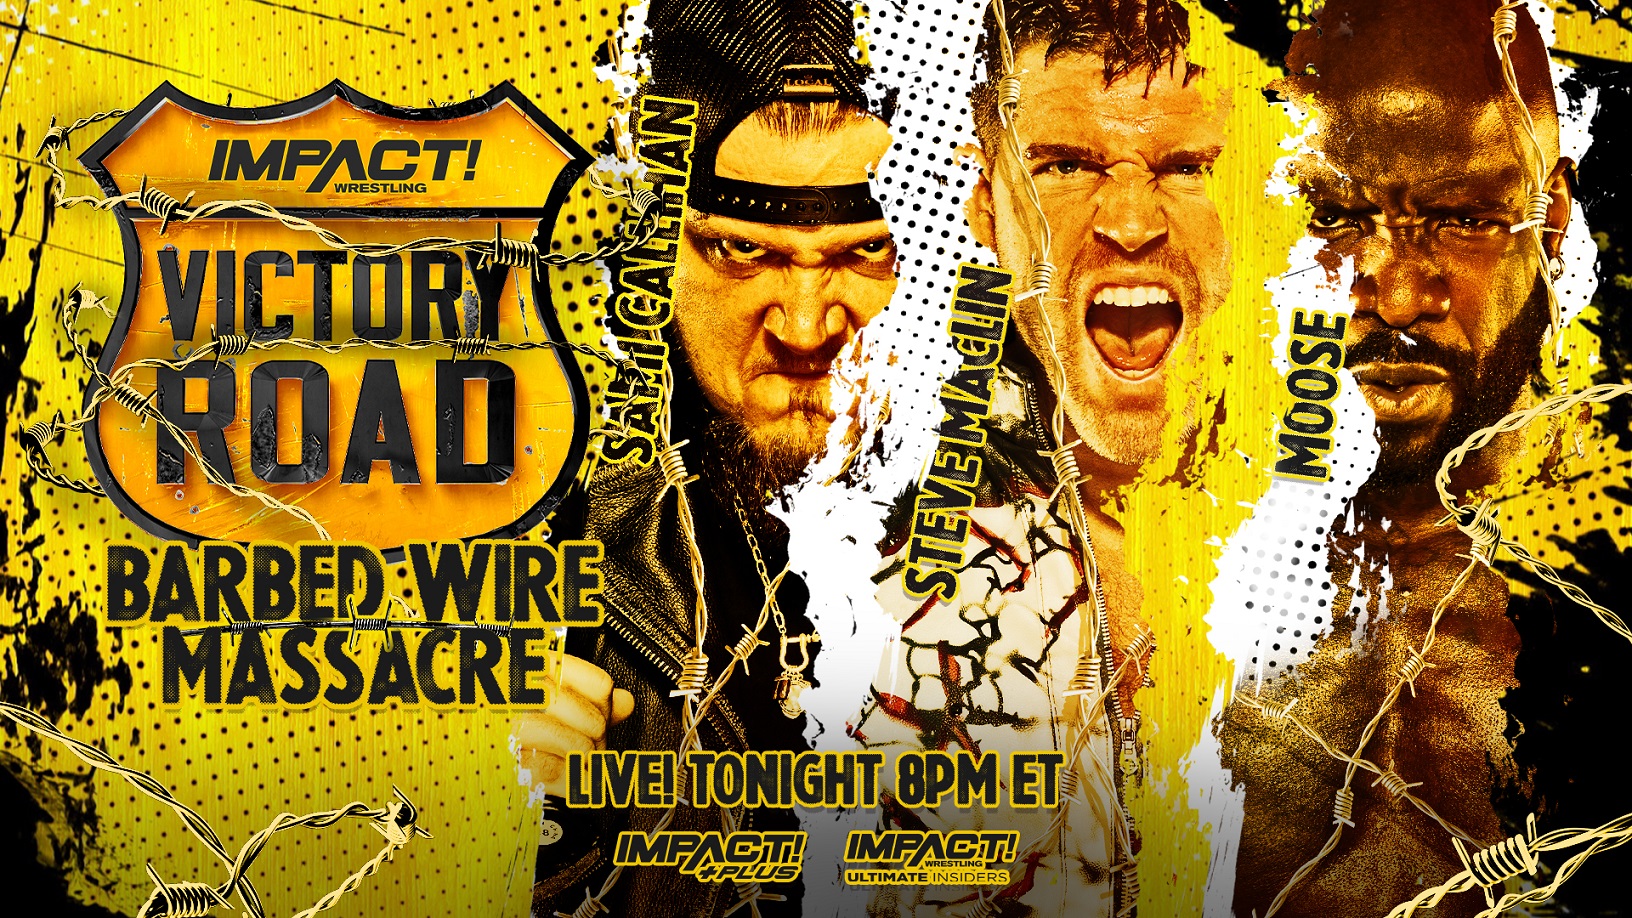 IMPACT Victory Road: Steve Maclin wins Barbed-Wire Masscare, Bobby Fish debuts, Raven added to Hall of Fame